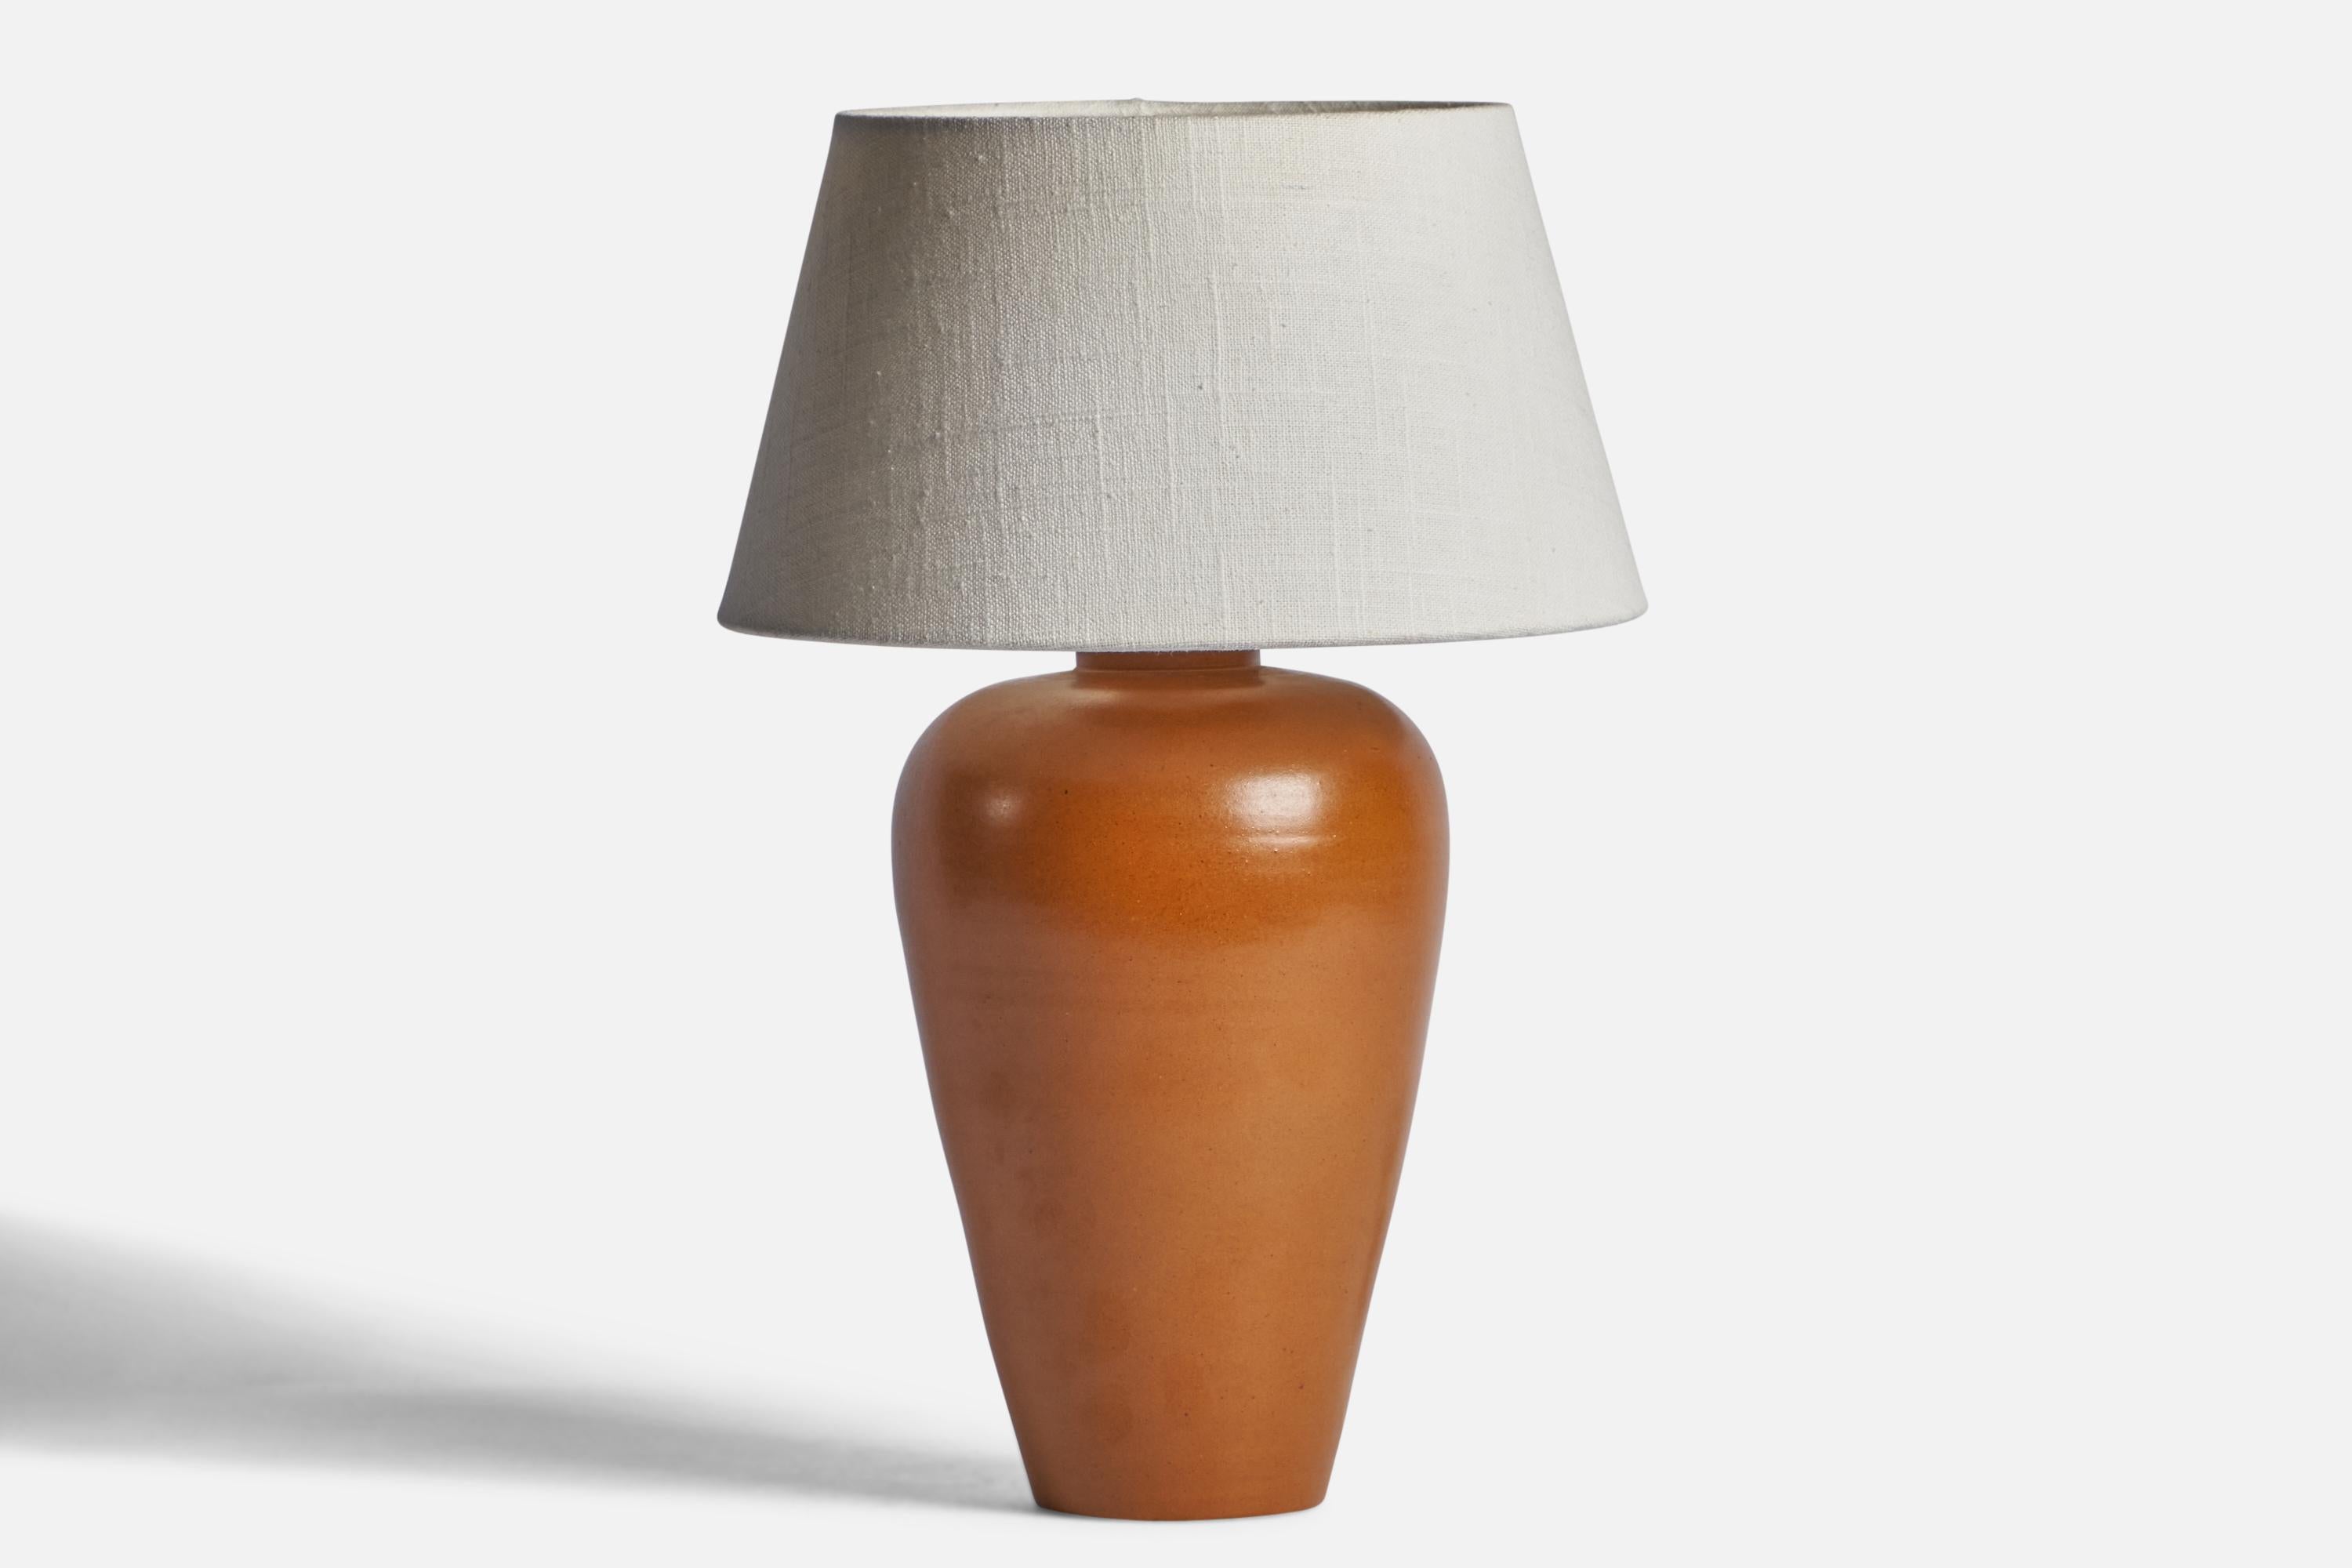 A brown-glazed earthenware table lamp produced by Upsala Ekeby, Sweden, c. 1950s.

Dimensions of Lamp (inches): 12” H x 6” Diameter
Dimensions of Shade (inches): 7” Top Diameter x 10” Bottom Diameter x 5.5” H 
Dimensions of Lamp with Shade (inches):